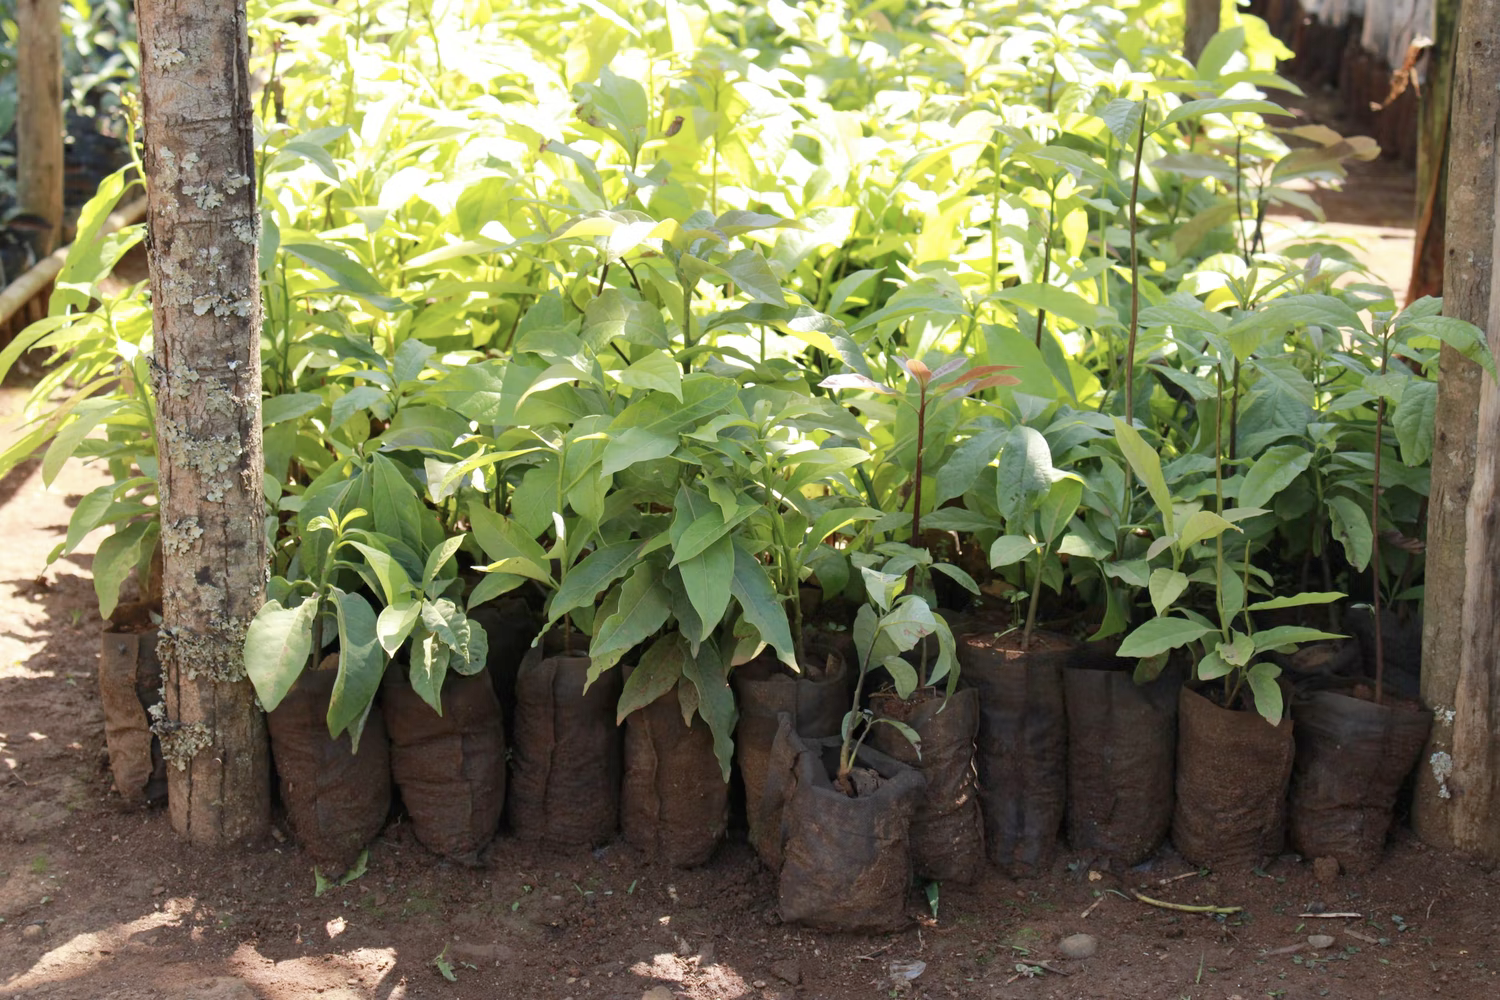 A collection of sapling trees in hessian sacks ready to be planted